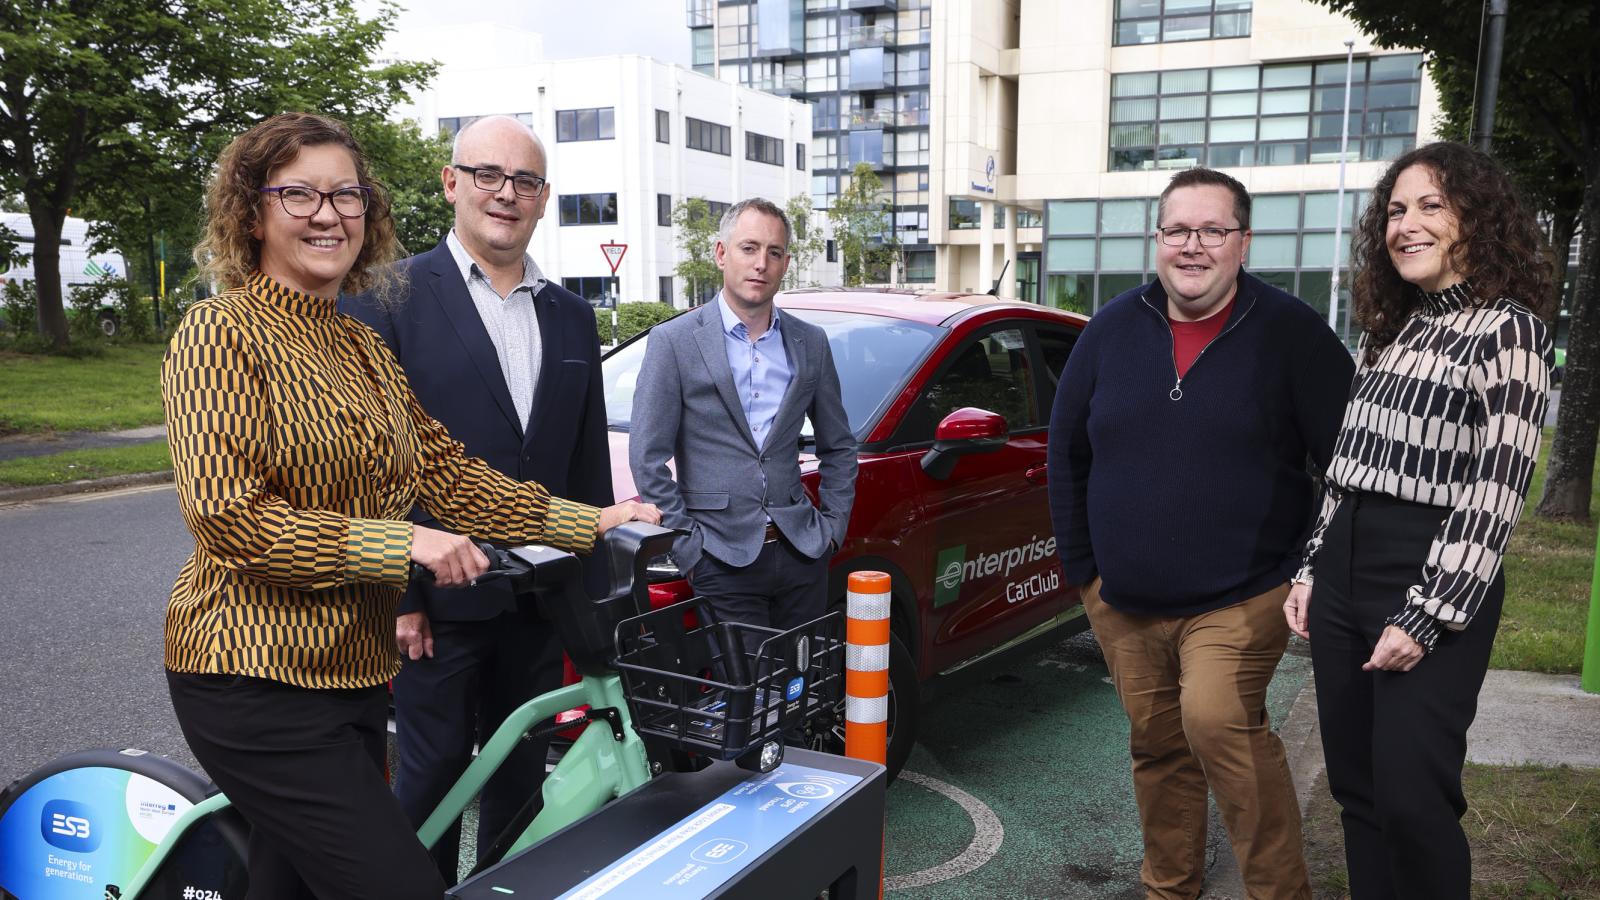 Atlantic Technological University together with Trinity College Dublin, ESB and Enterprise Rent-A-Car, will lead a €1.35 million shared electric mobility project. Funding of almost €850,000 has been awarded by the Government of Ireland through the Sustainable Energy Authority of Ireland (SEAI).